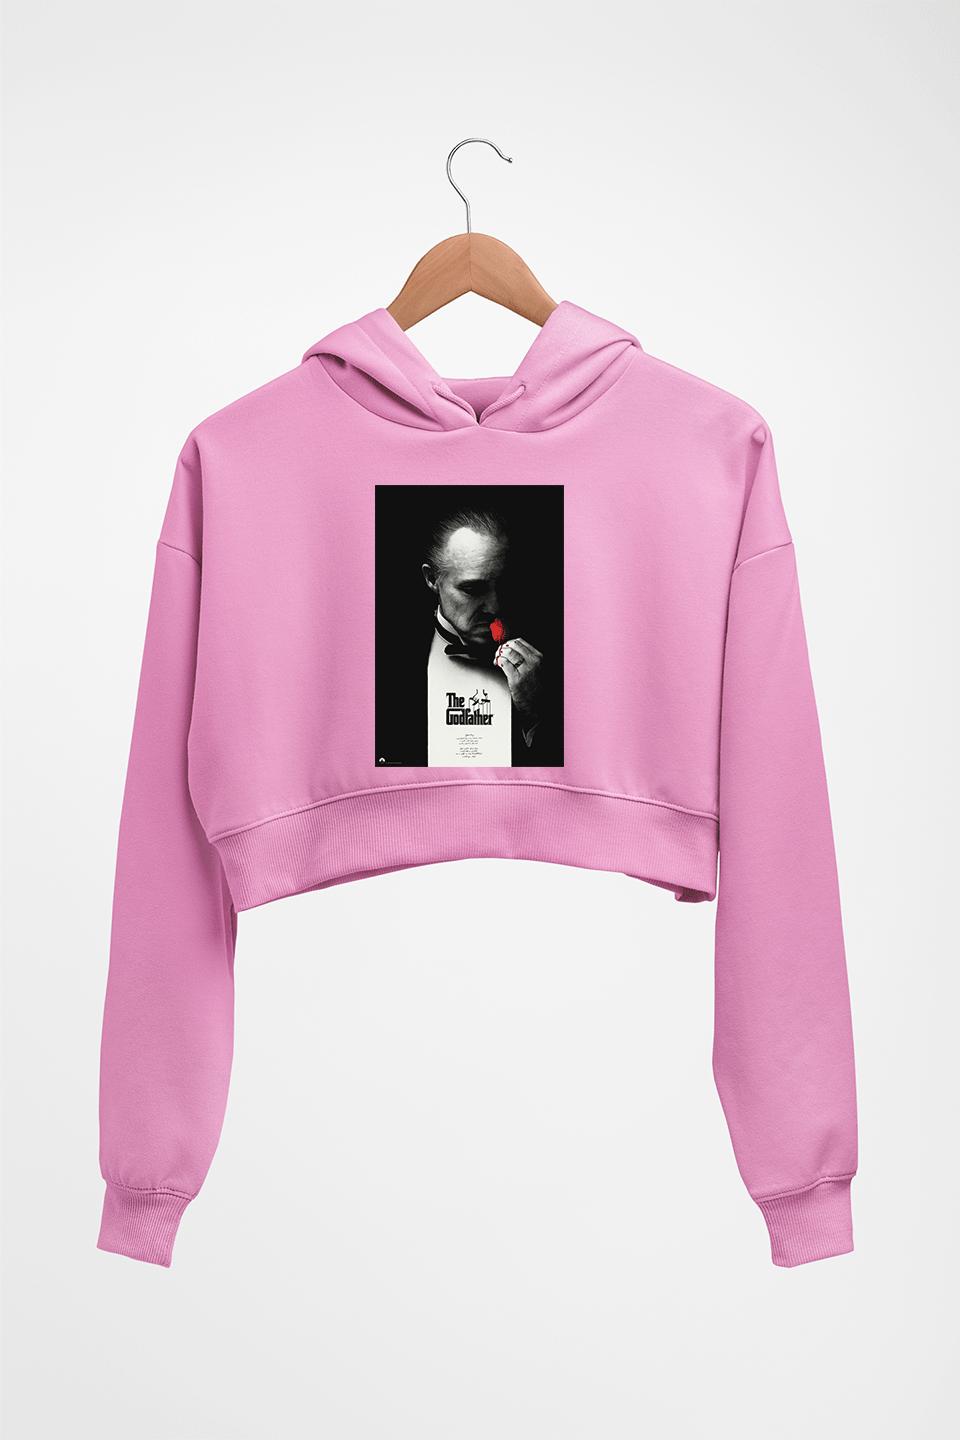 The Godfather Crop HOODIE FOR WOMEN